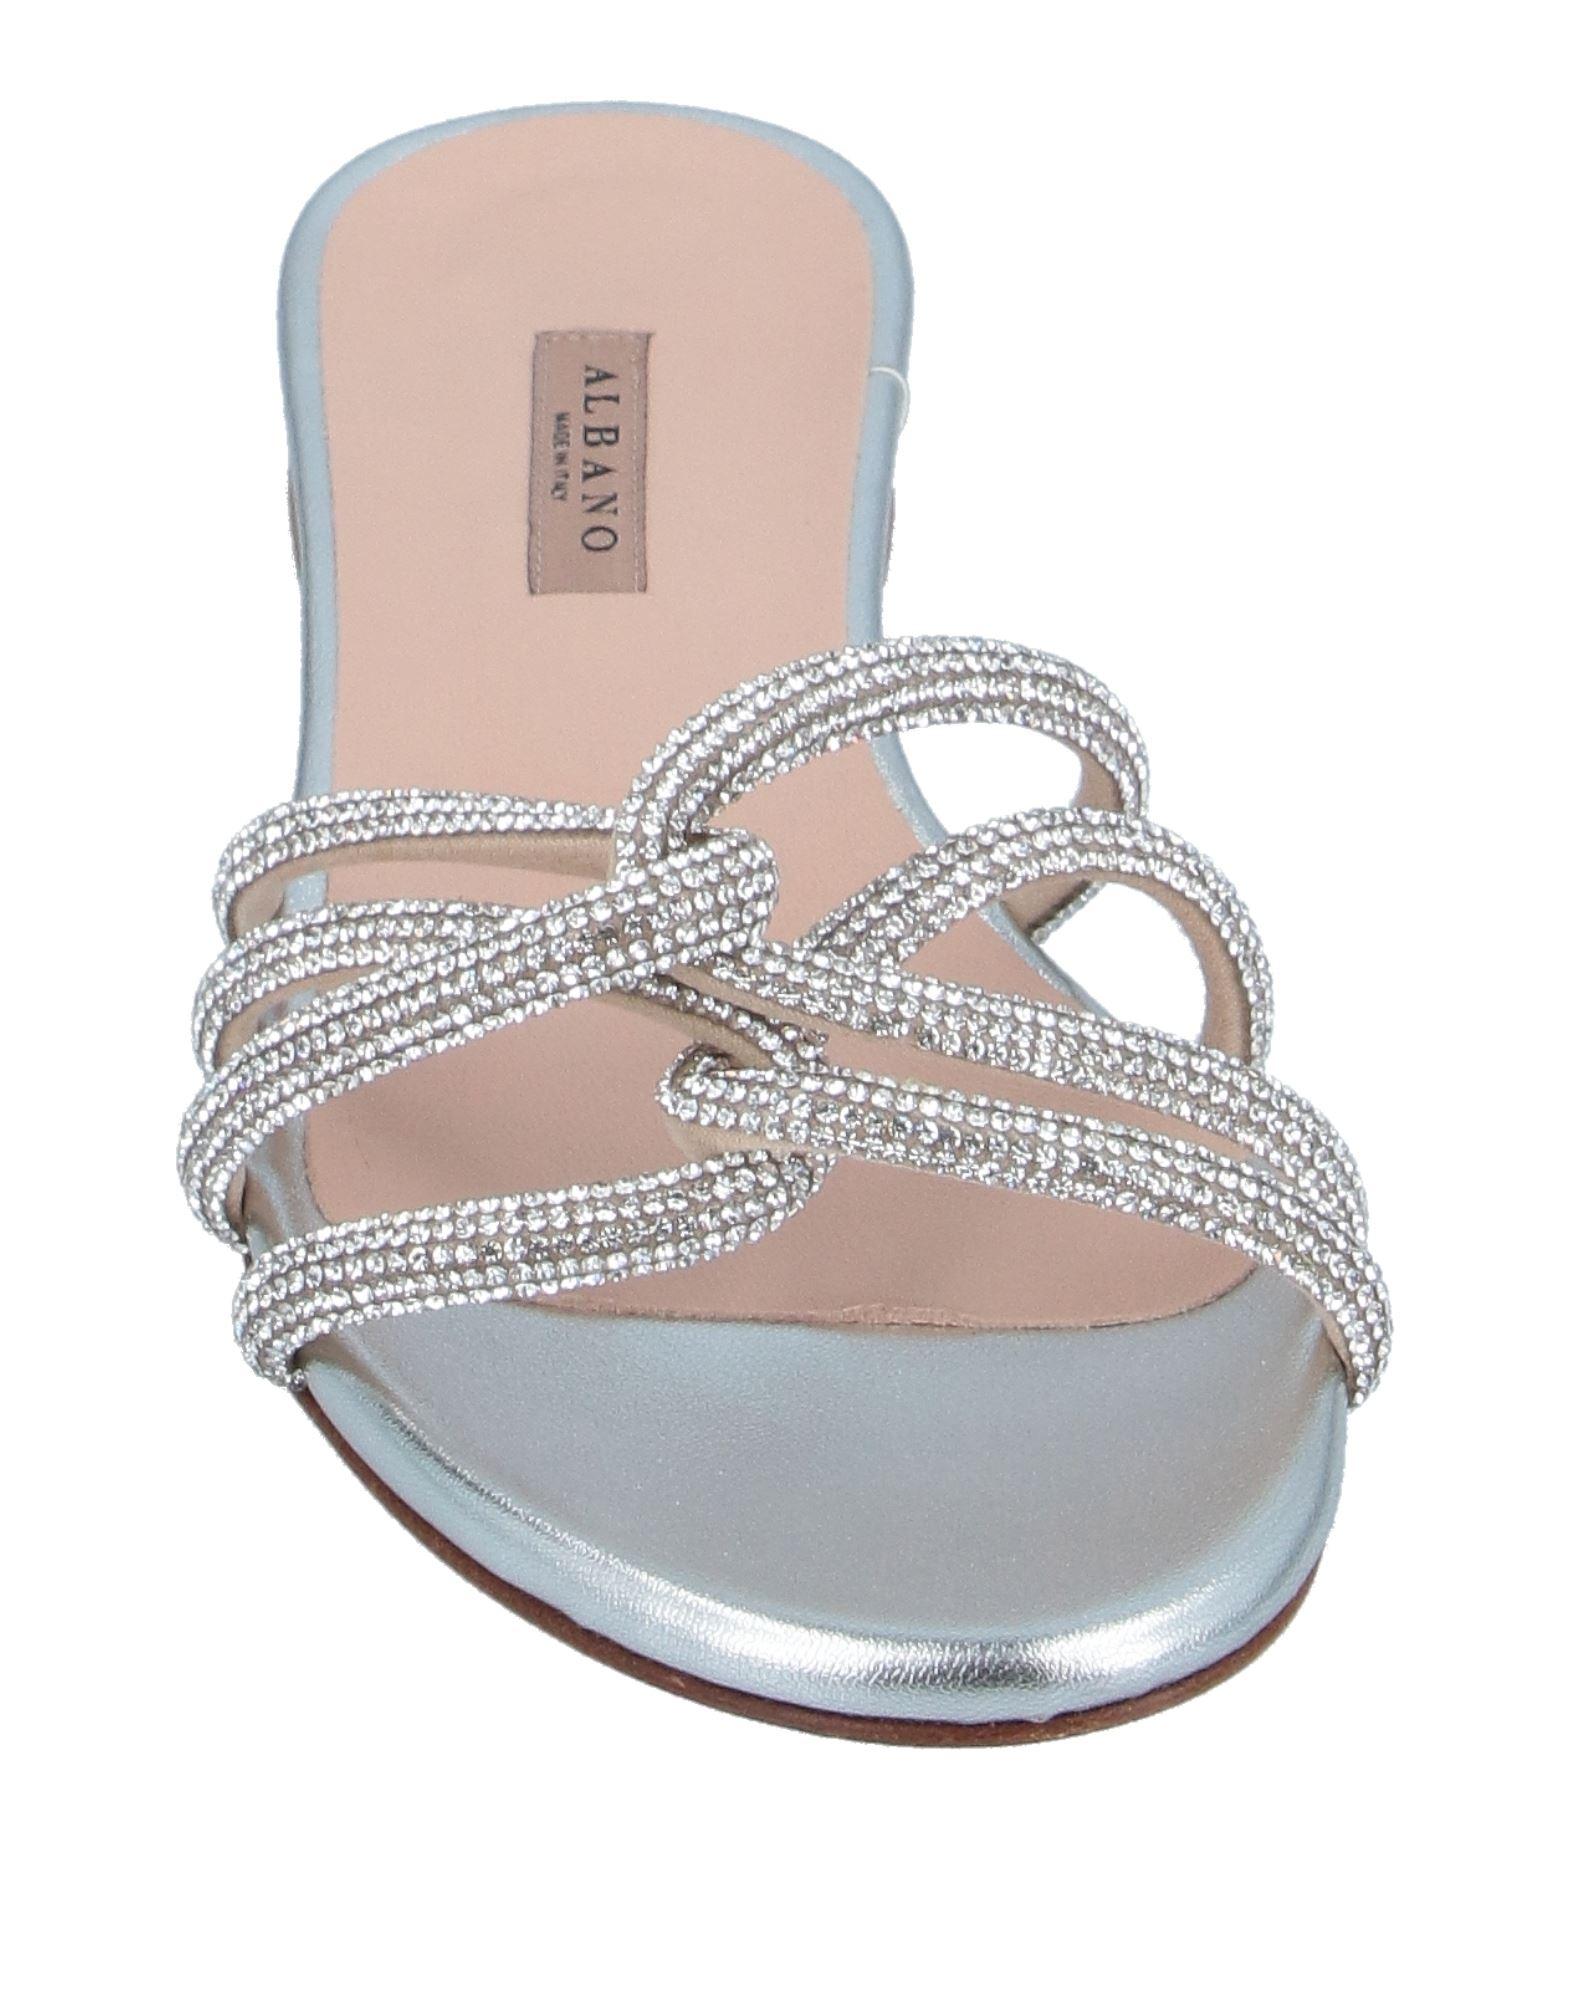 Albano Leather Sandals in Silver (Metallic) | Lyst